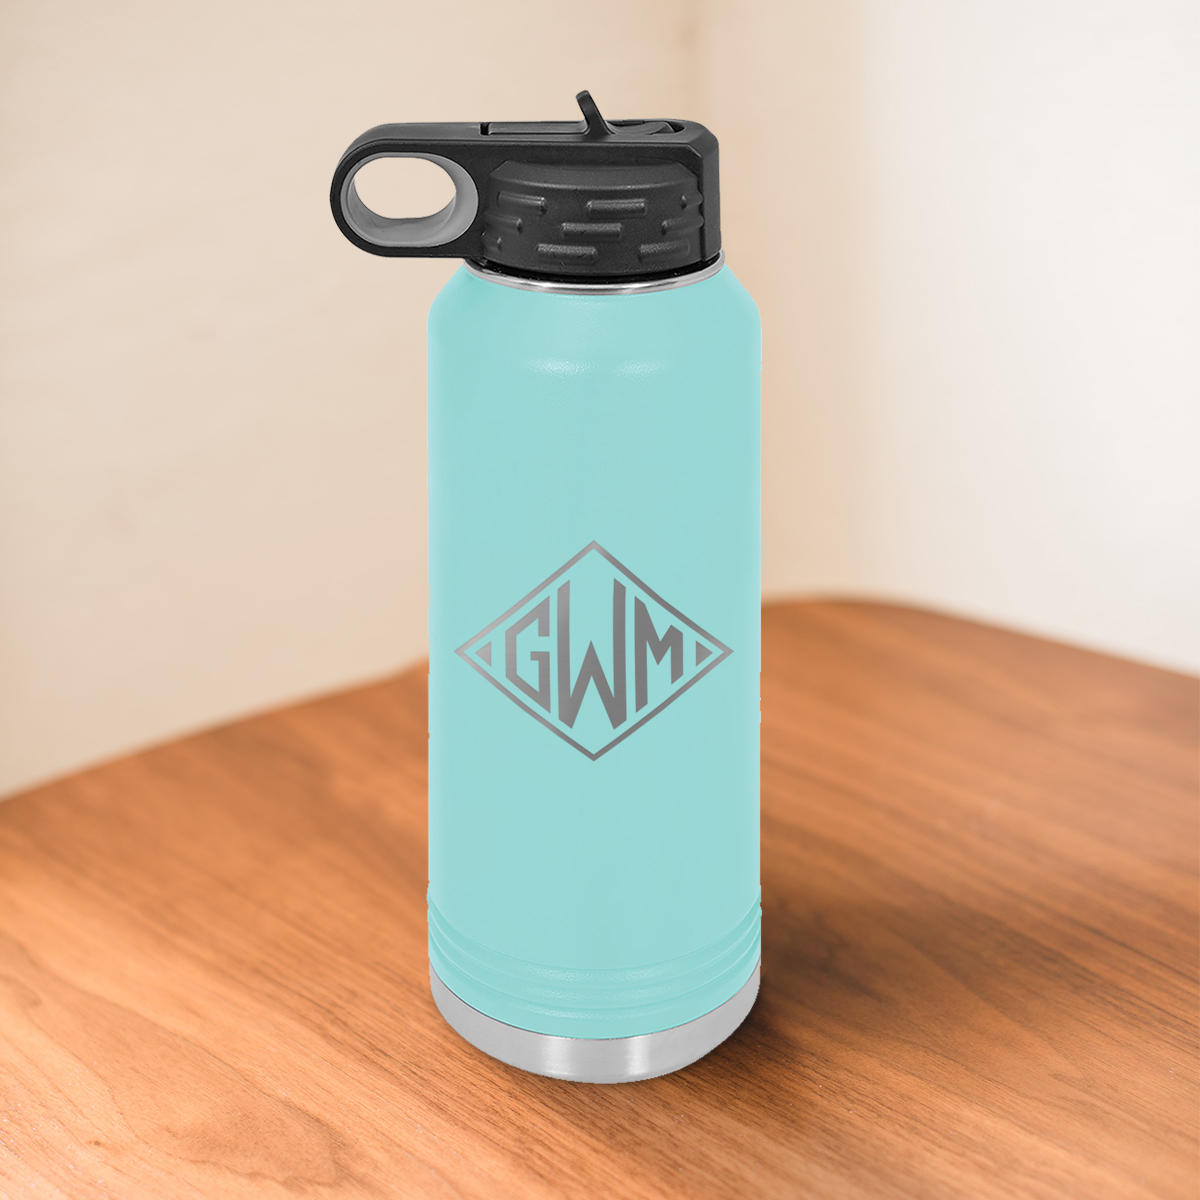 How to Design a Water Bottle & 3 Design Ideas